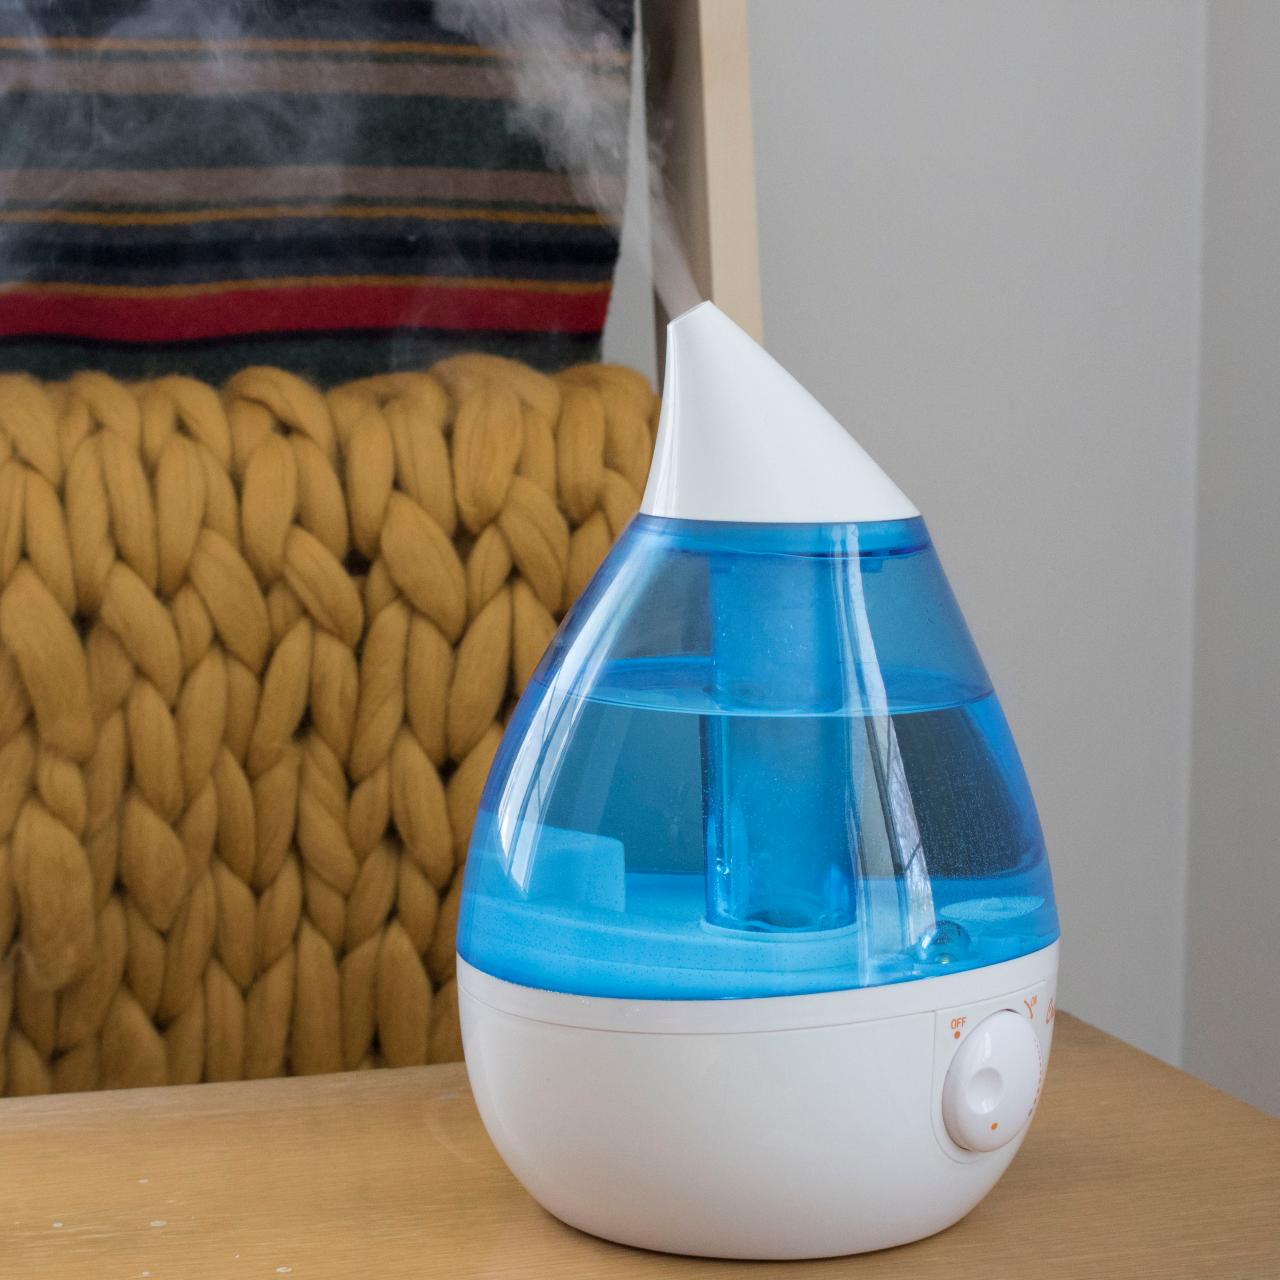 How To Clean Your Humidifier—Plus An Important Step To Take Daily